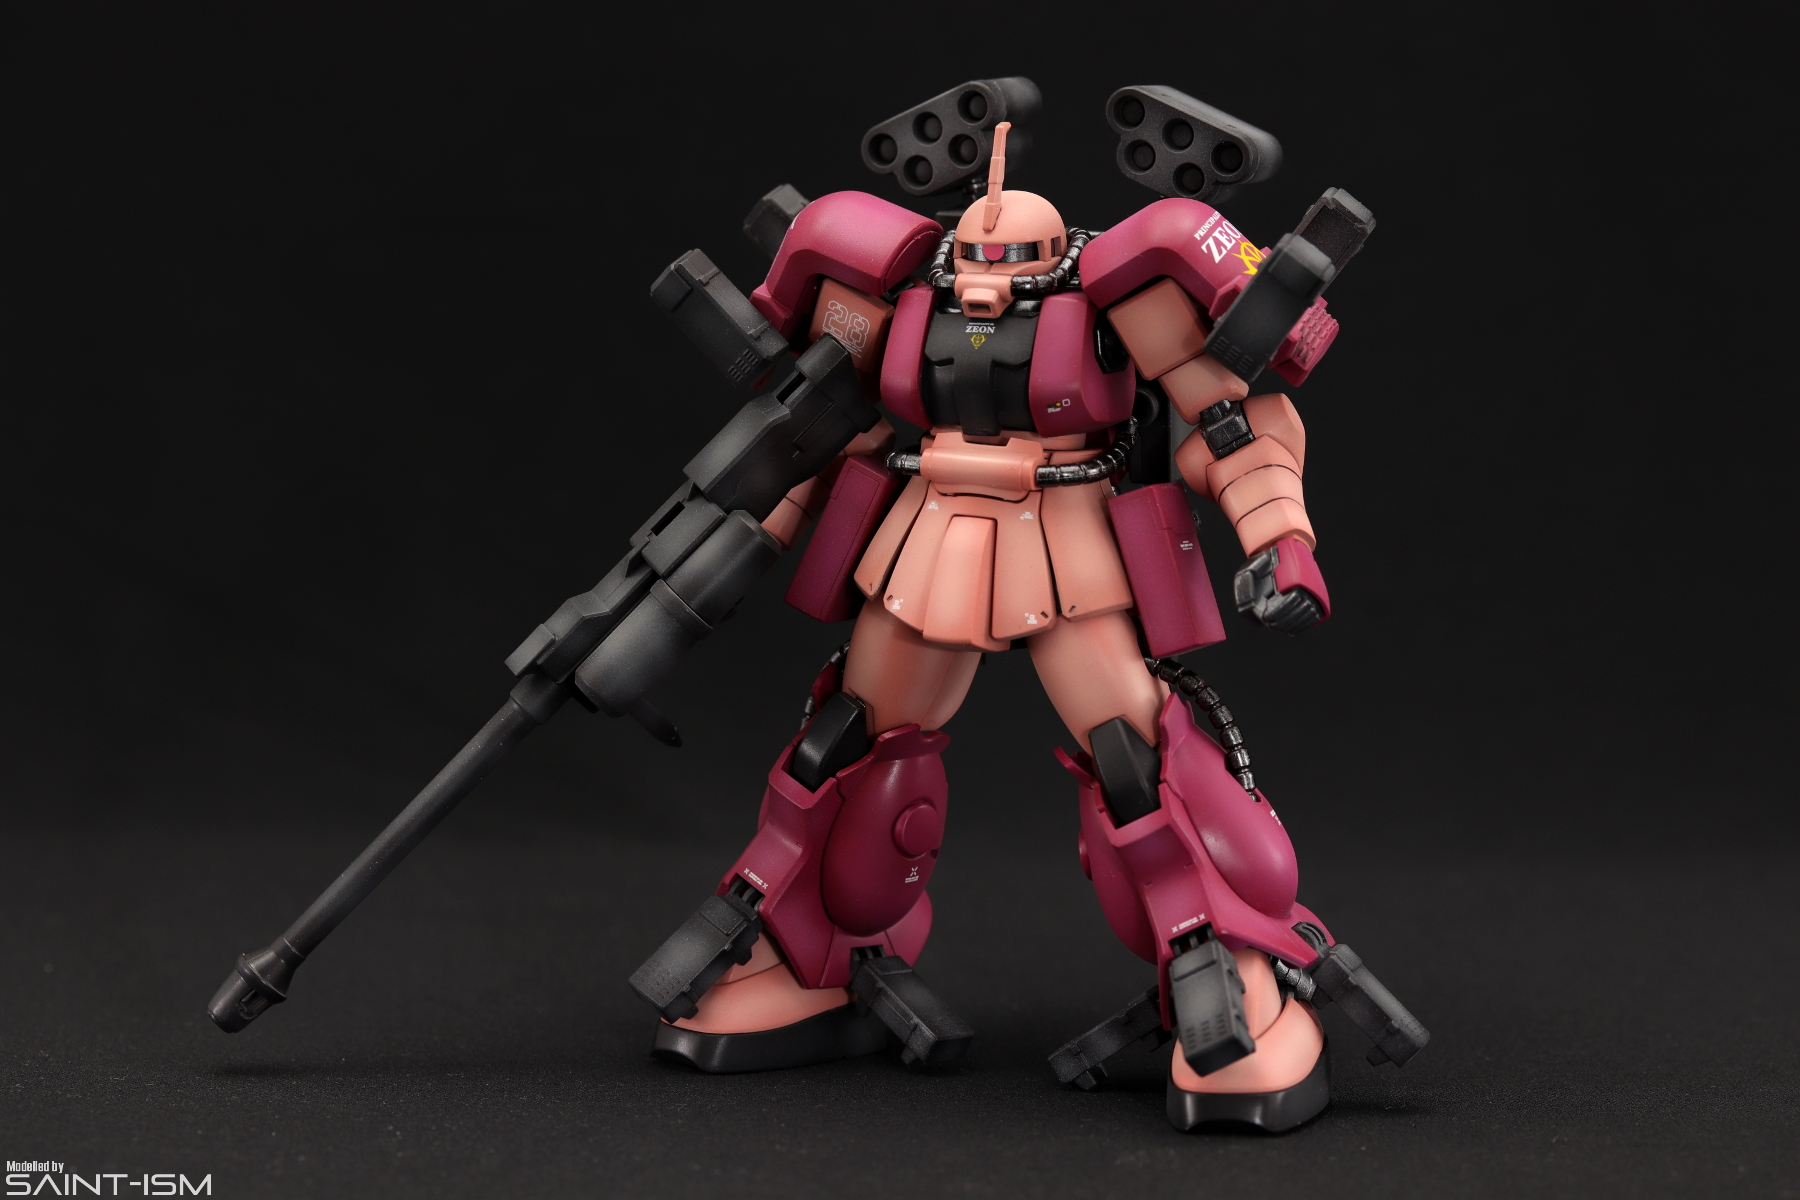 What clearcoat/topcoat can I use over acrylic paint? : r/Gunpla